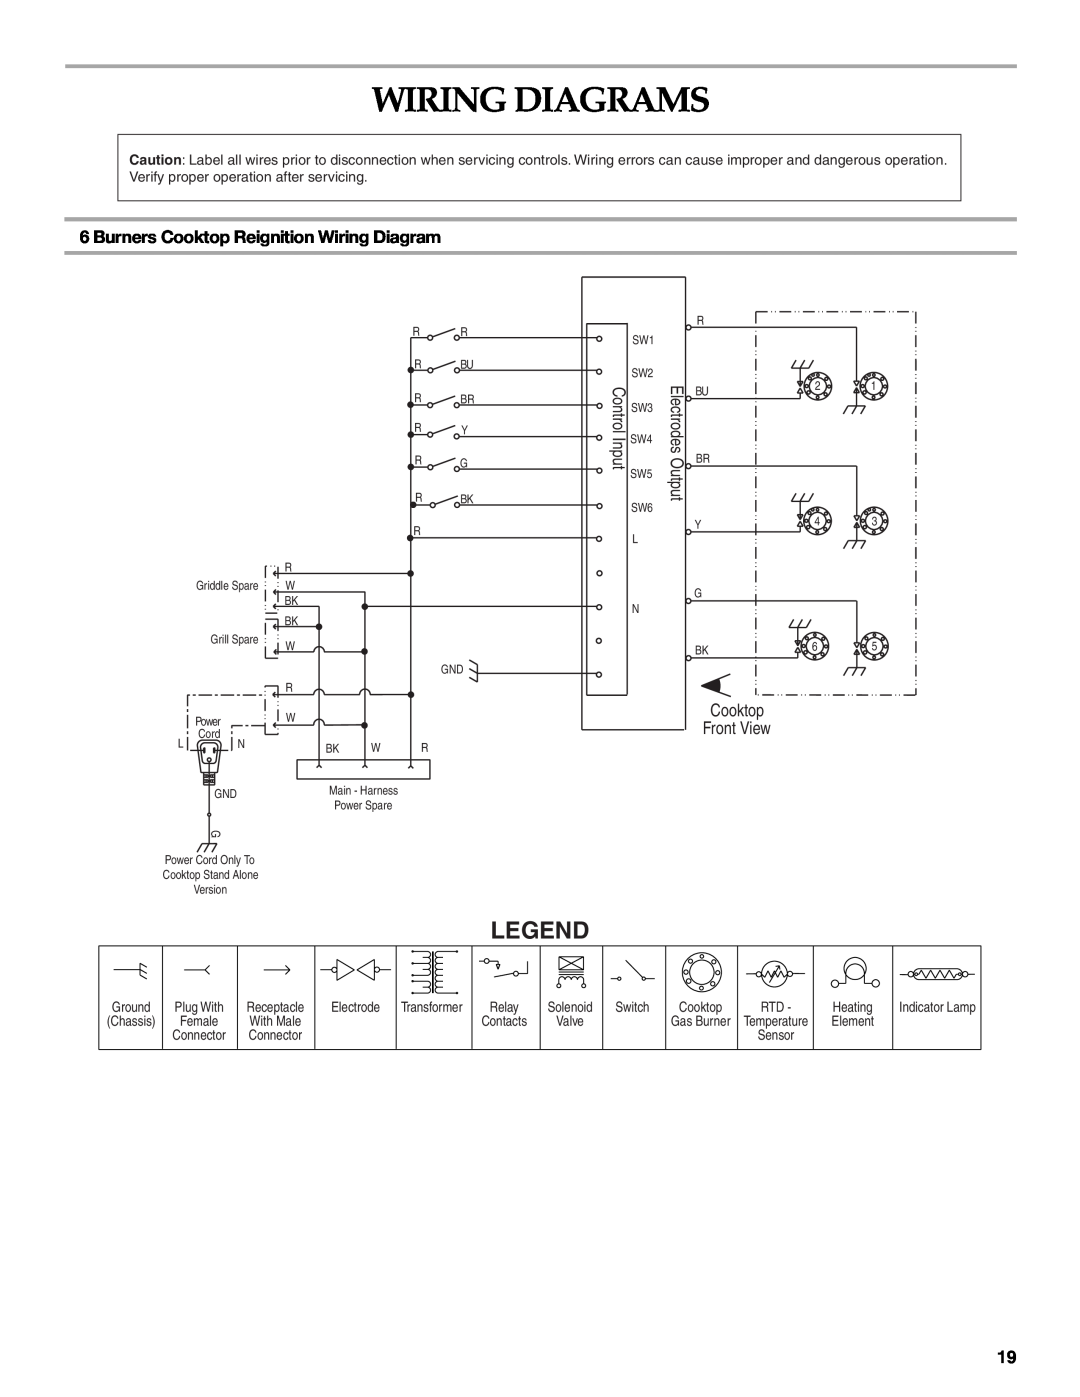 KitchenAid W10271686C Wiring Diagrams, Burners Cooktop Reignition Wiring Diagram, Cooktop Front View 